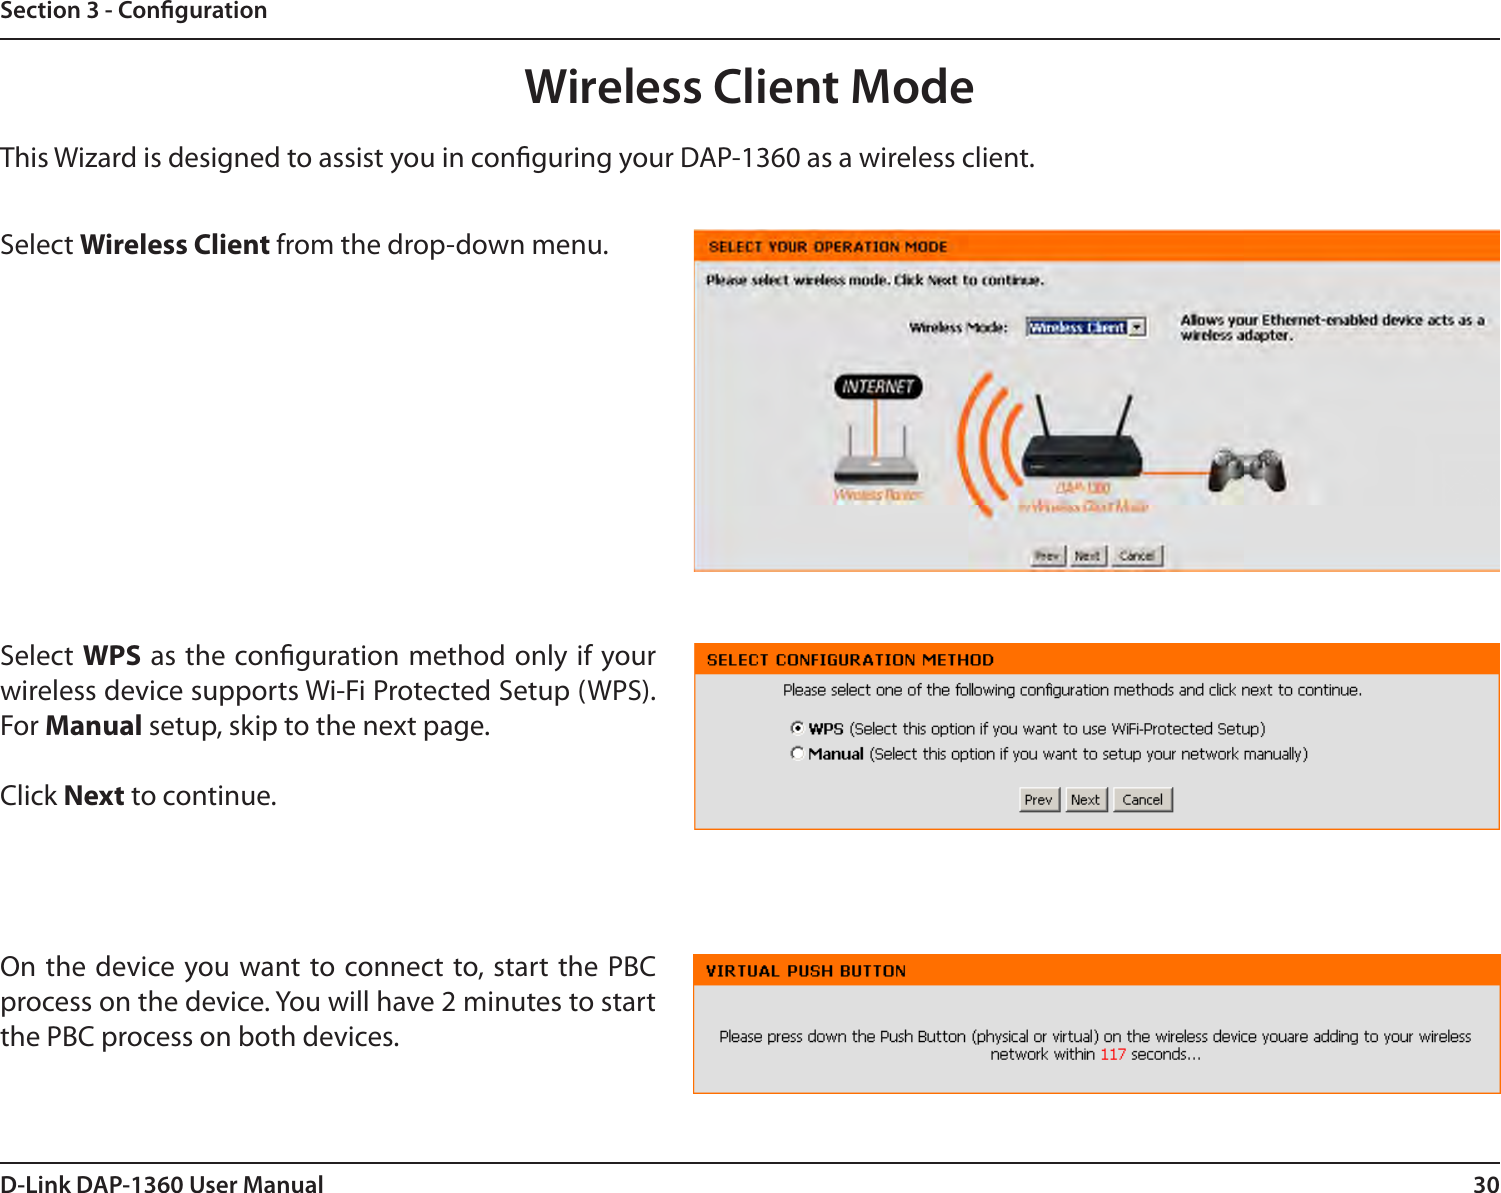 30D-Link DAP-1360 User ManualSection 3 - CongurationThis Wizard is designed to assist you in conguring your DAP-1360 as a wireless client.Wireless Client ModeSelect Wireless Client from the drop-down menu. Select WPS as the conguration method only if your wireless device supports Wi-Fi Protected Setup (WPS). For Manual setup, skip to the next page.Click Next to continue.On the device you want to connect  to, start the PBC process on the device. You will have 2 minutes to start the PBC process on both devices.